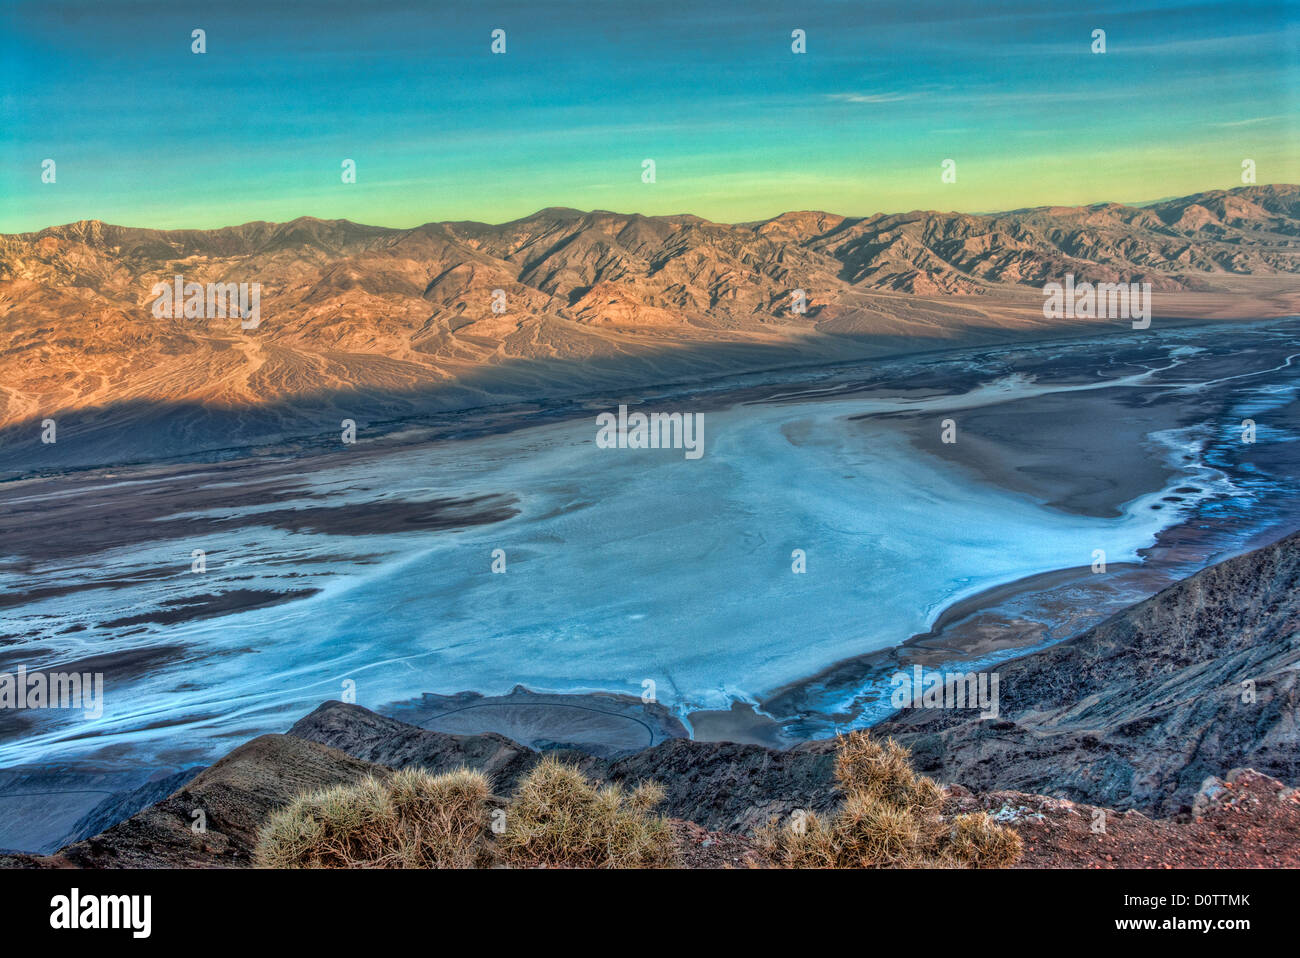 badwater, basin, Dante's view, nature, landscape, Death Valley, national park, California, USA, United States, America, Stock Photo